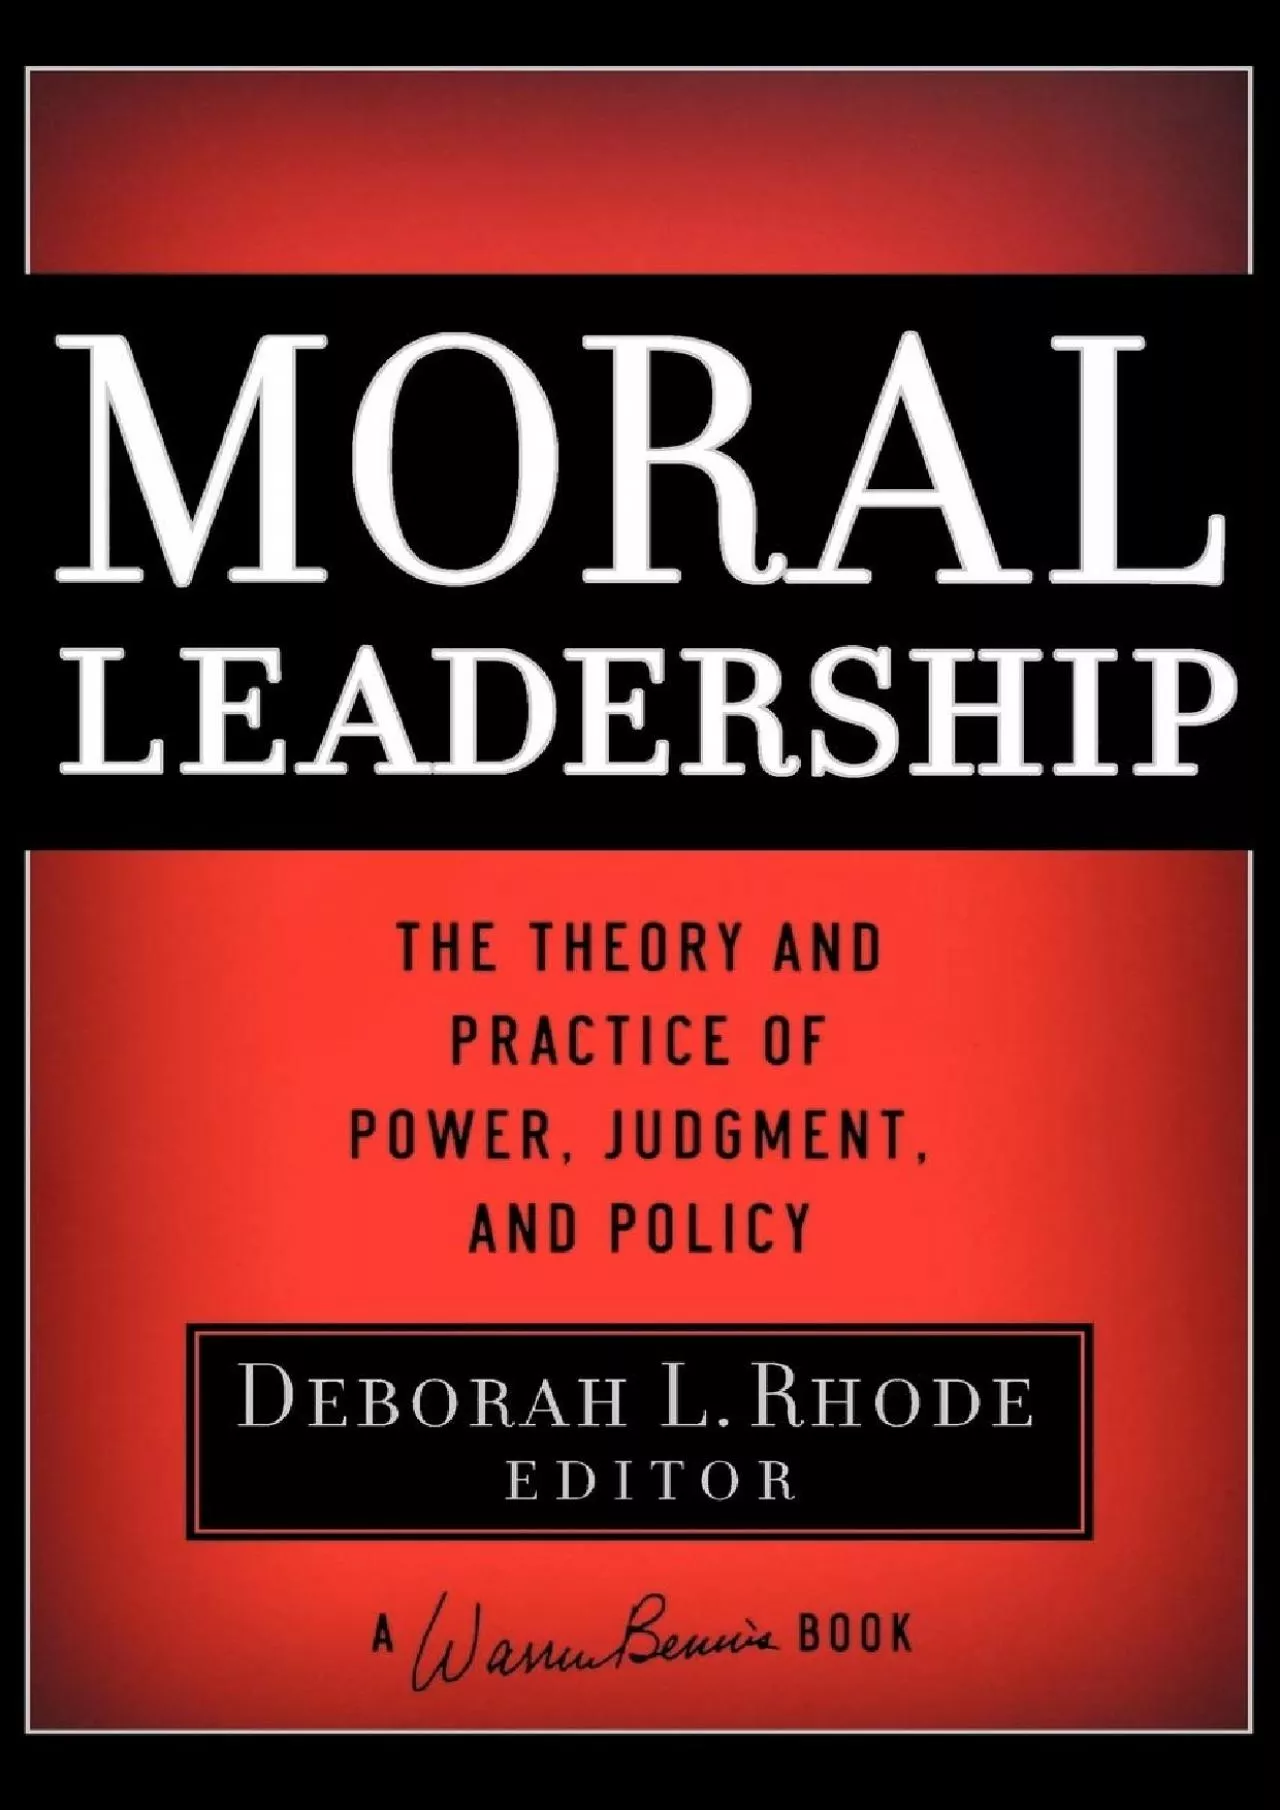 (DOWNLOAD)-Moral Leadership: The Theory and Practice of Power, Judgment and Policy